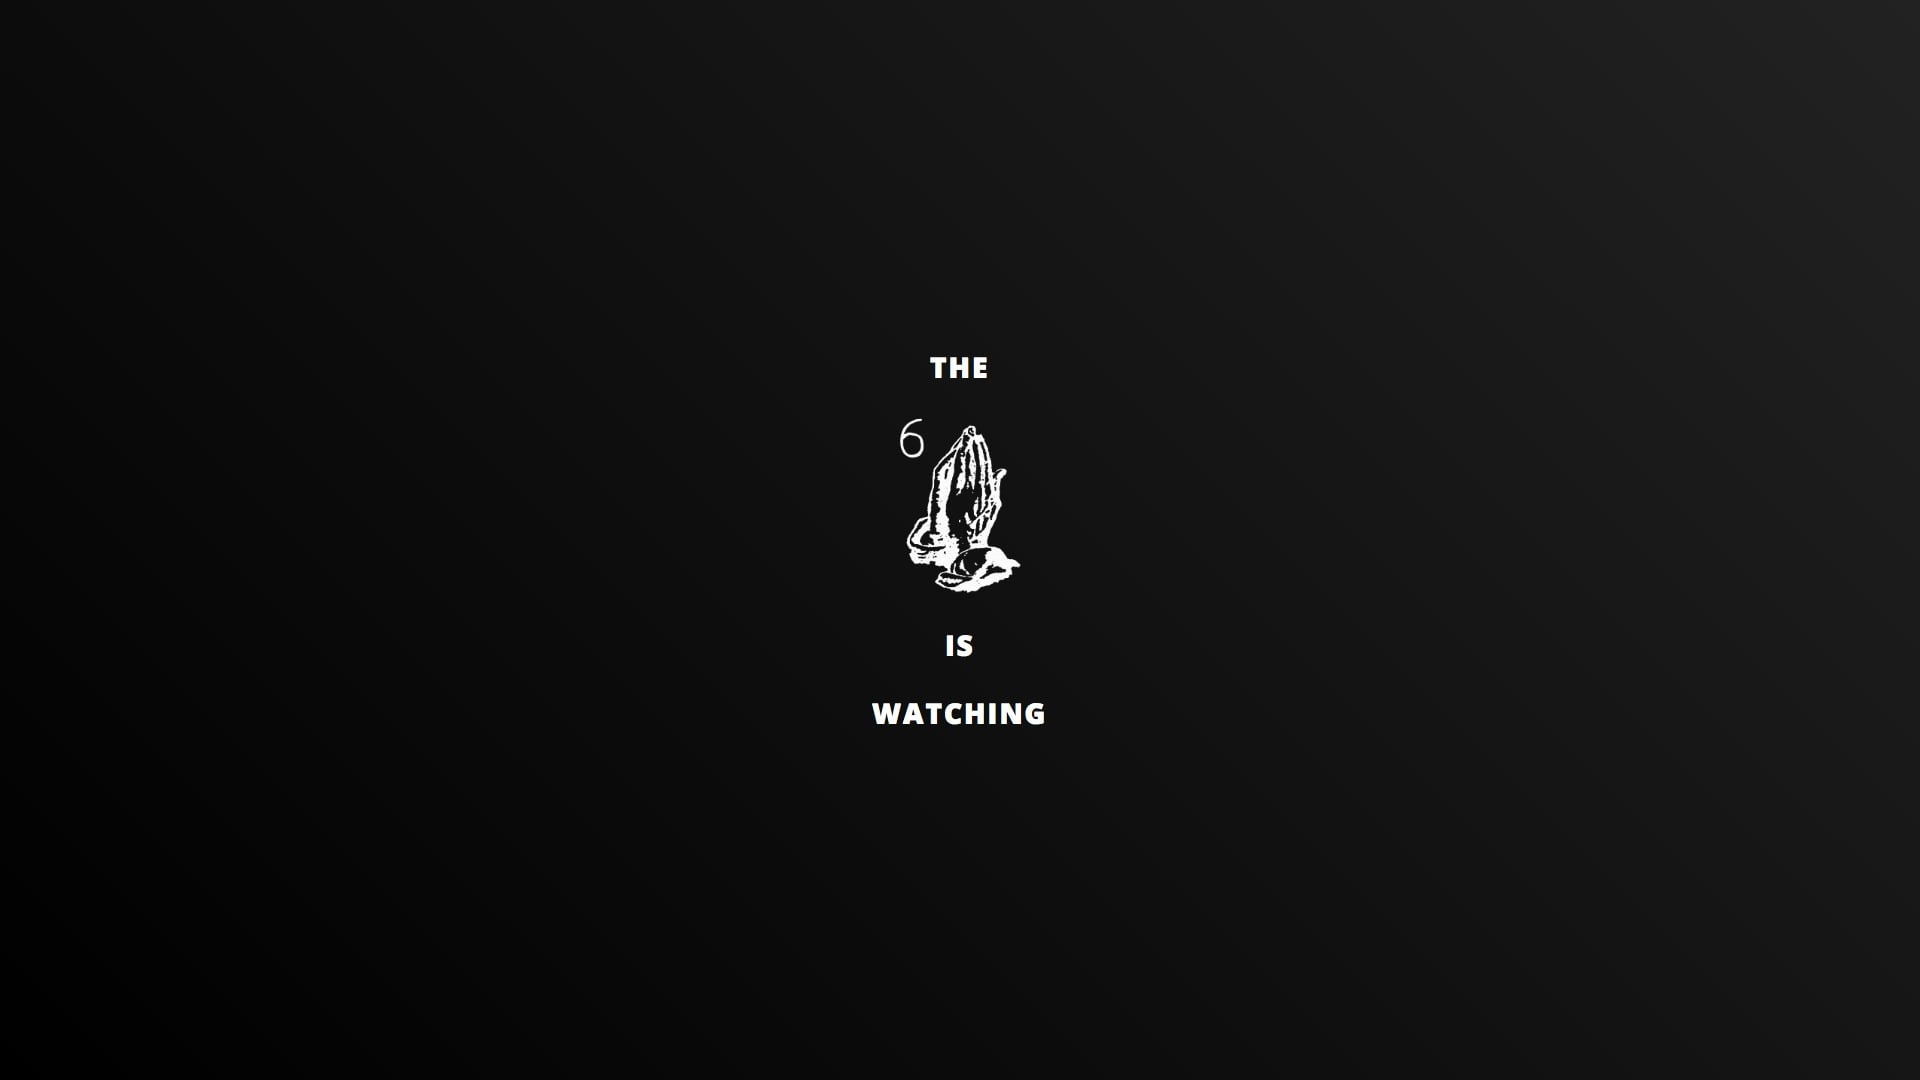 OVO wallpaper, The is god watching text, hip hop, simple background, OVOXO